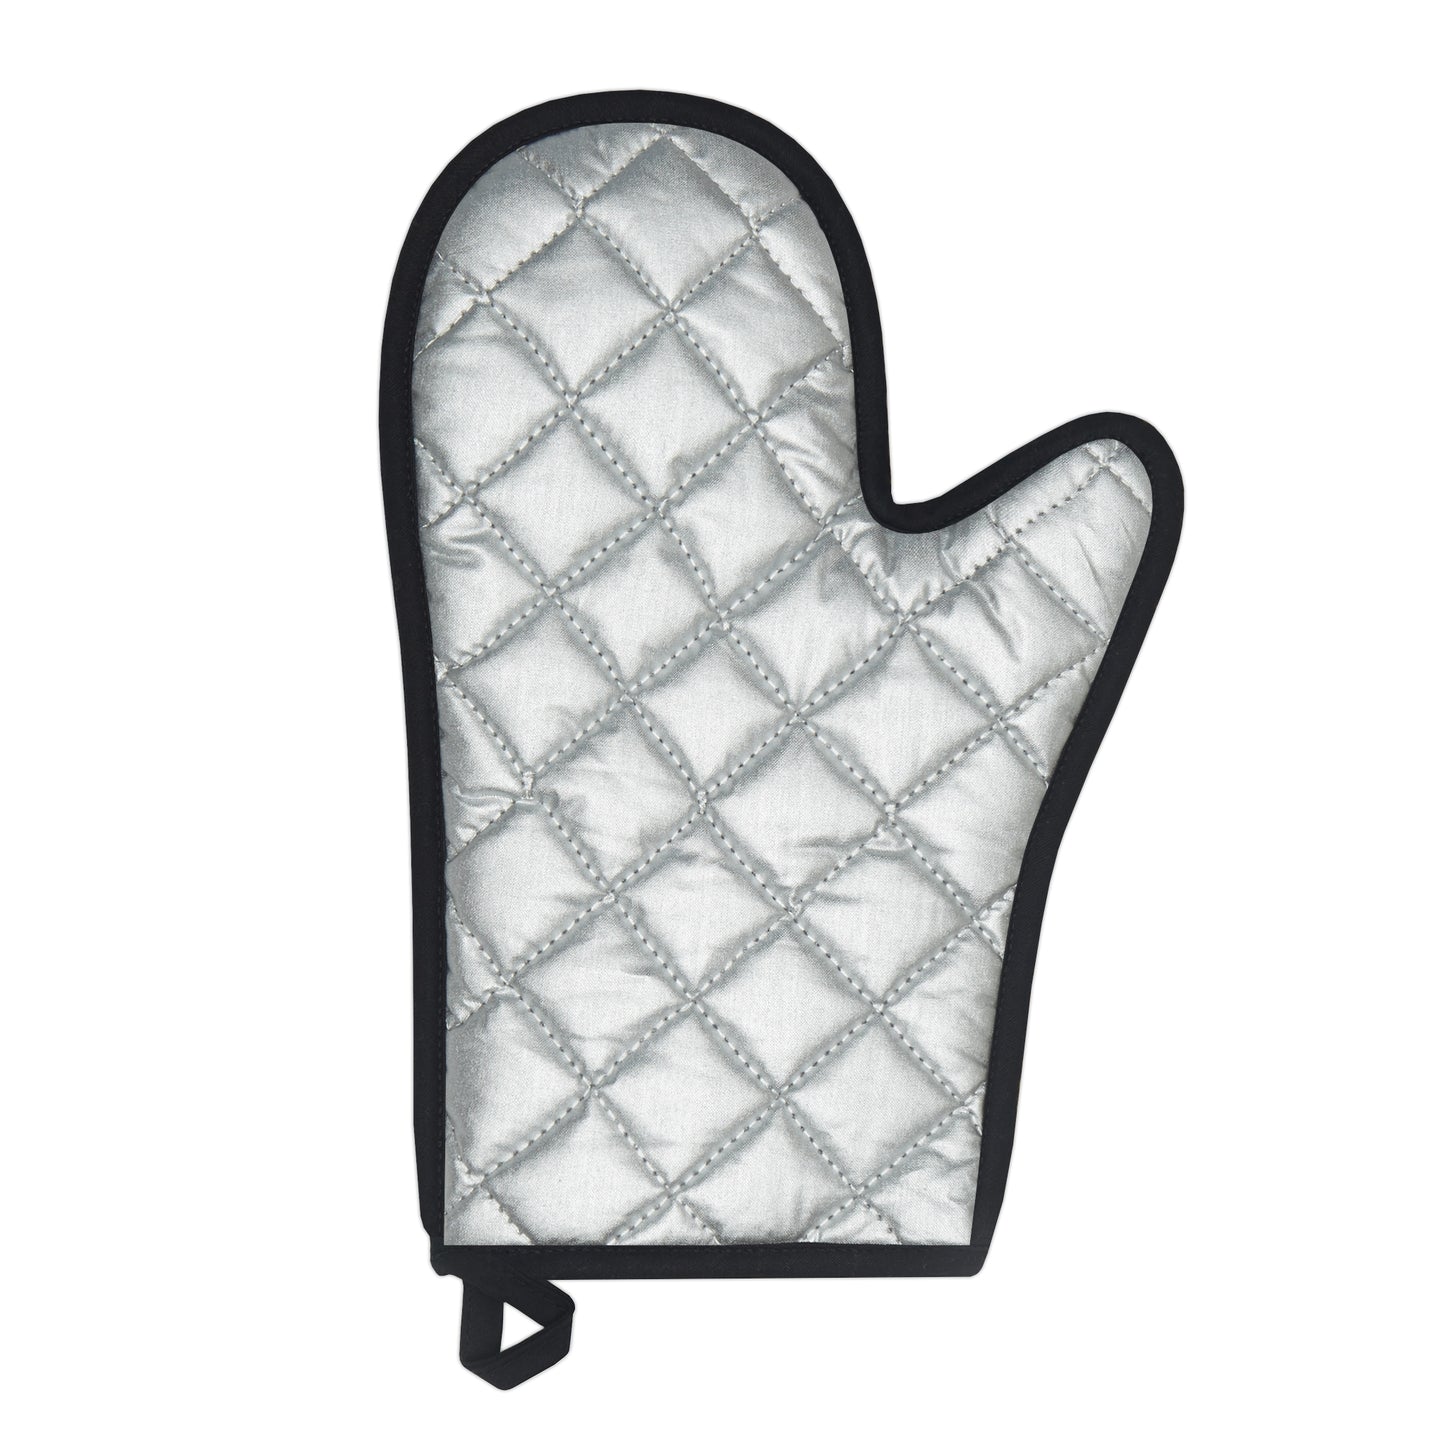 "Happy Thoughts" Oven Glove